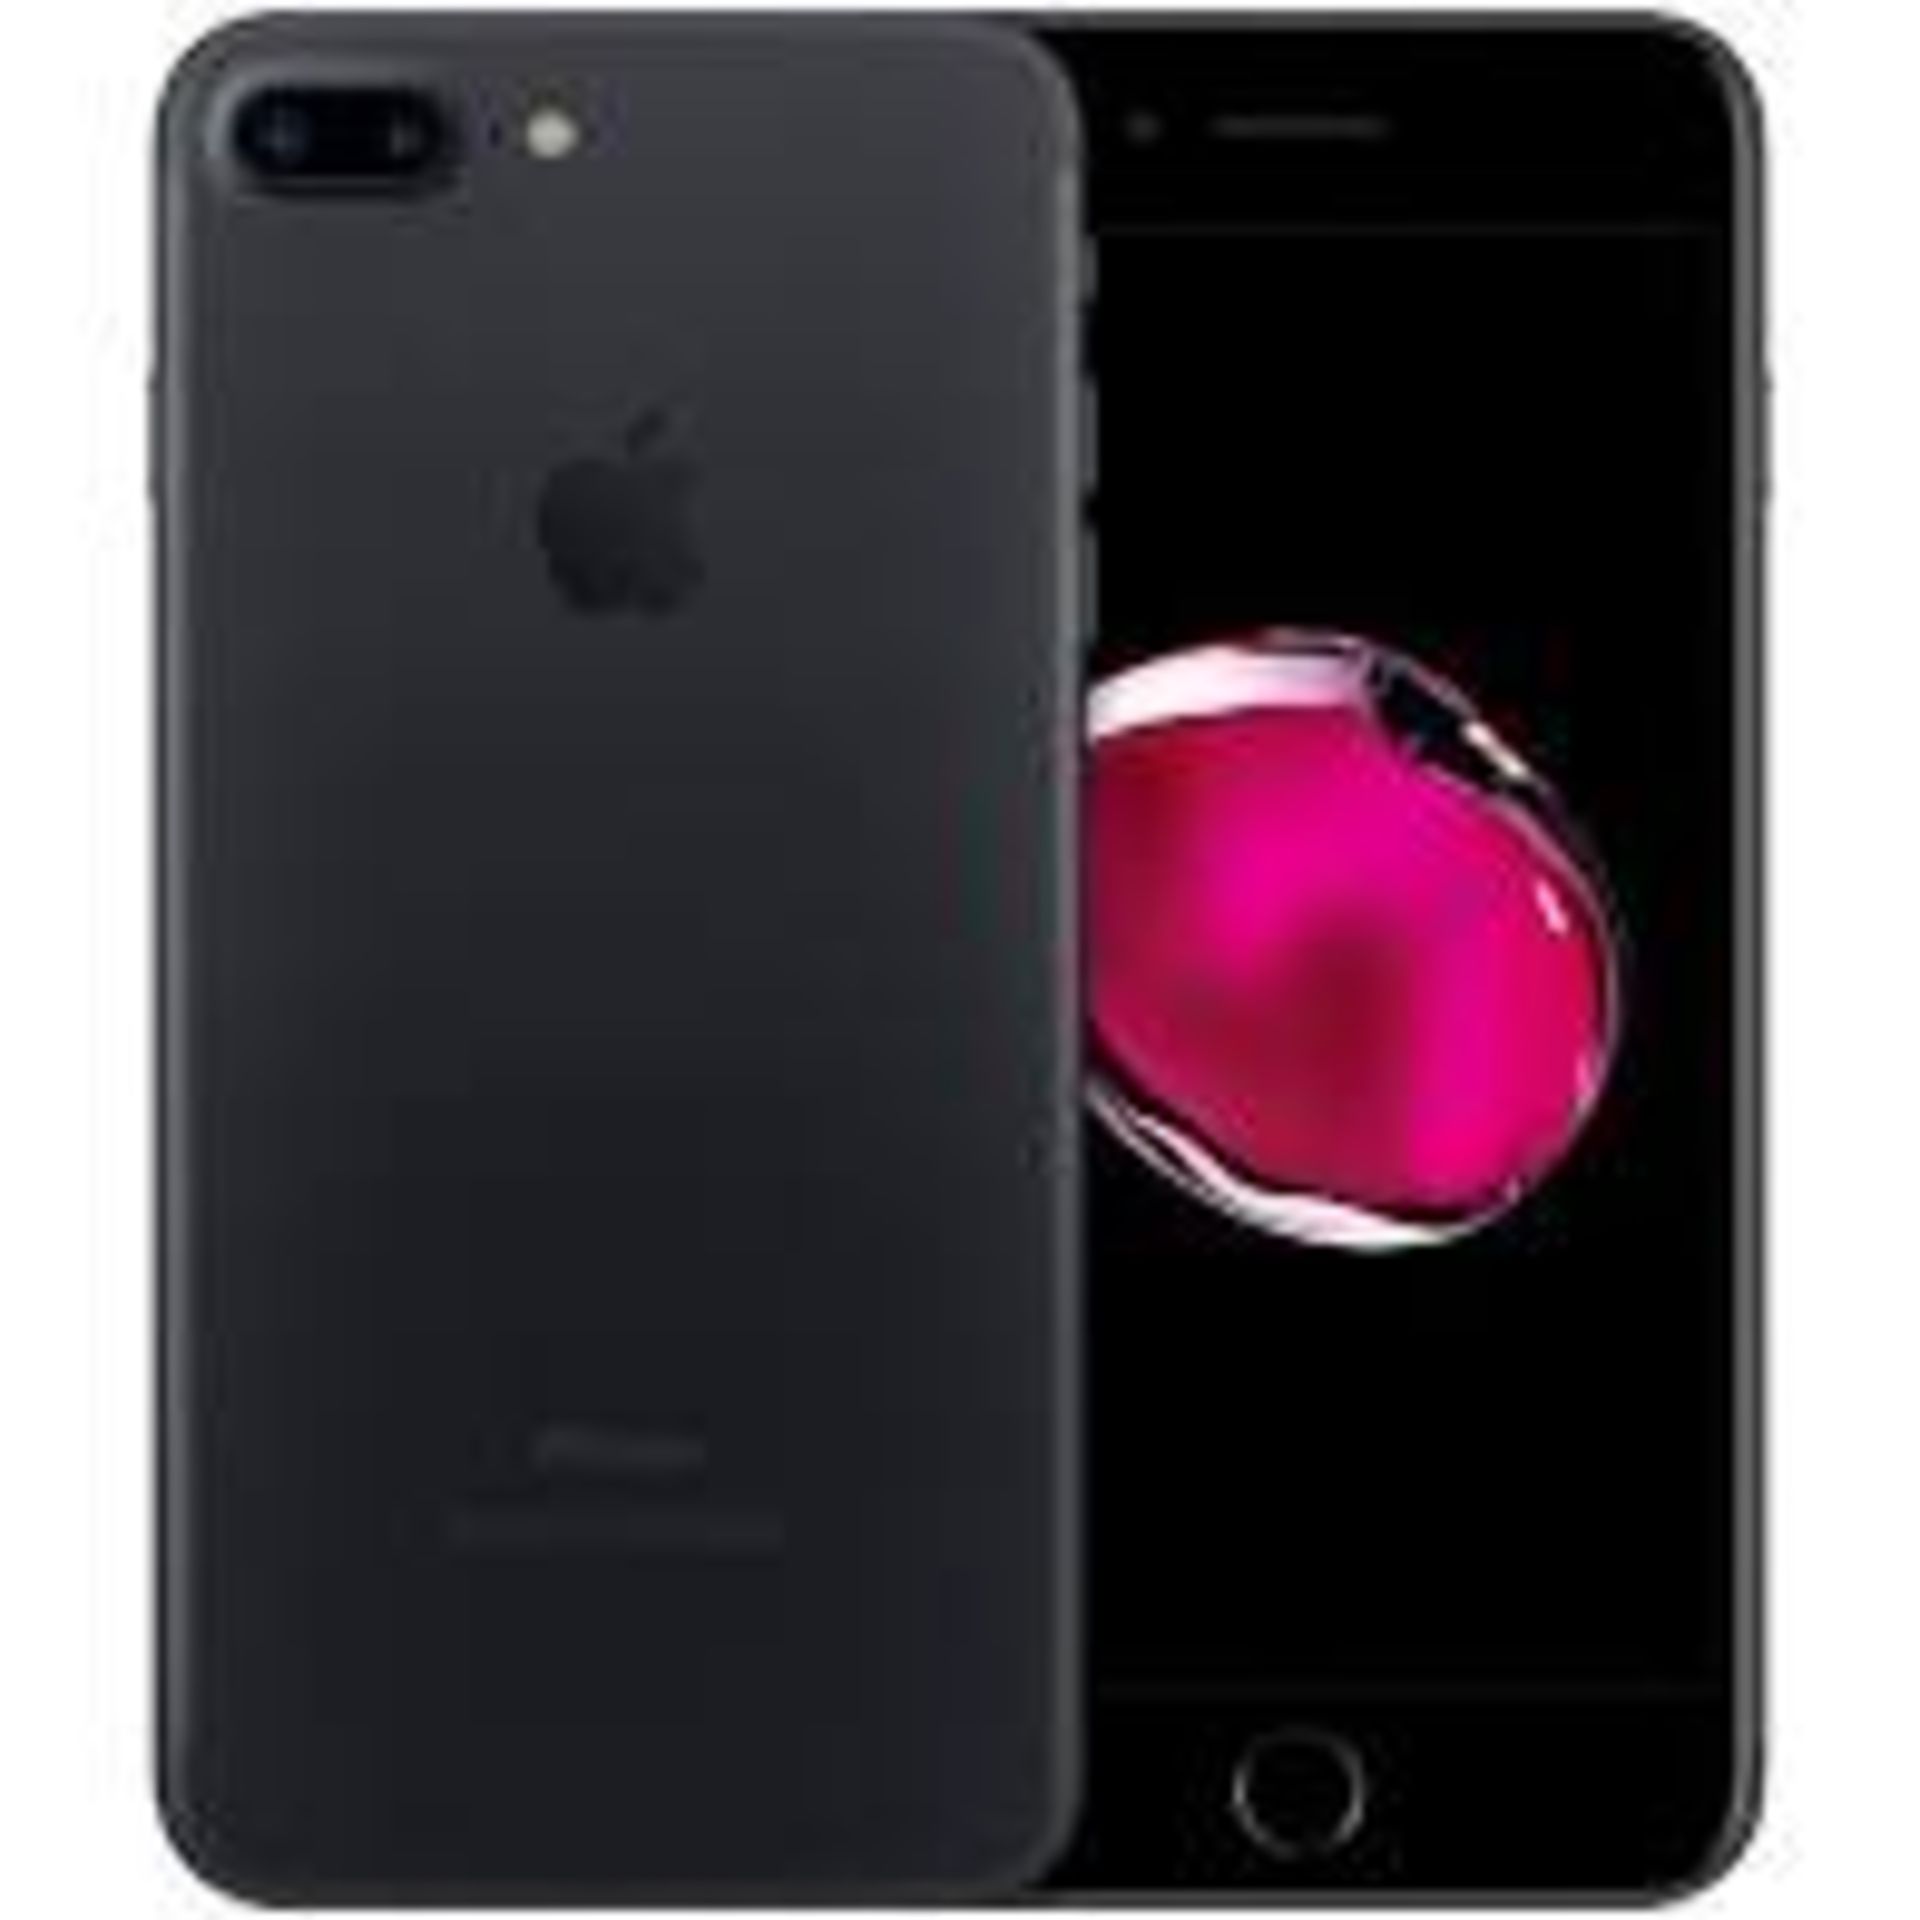 Apple iPhone 7+ 128GB Black RRP £430 - Grade A - Perfect Working Condition - (Fully refurbished